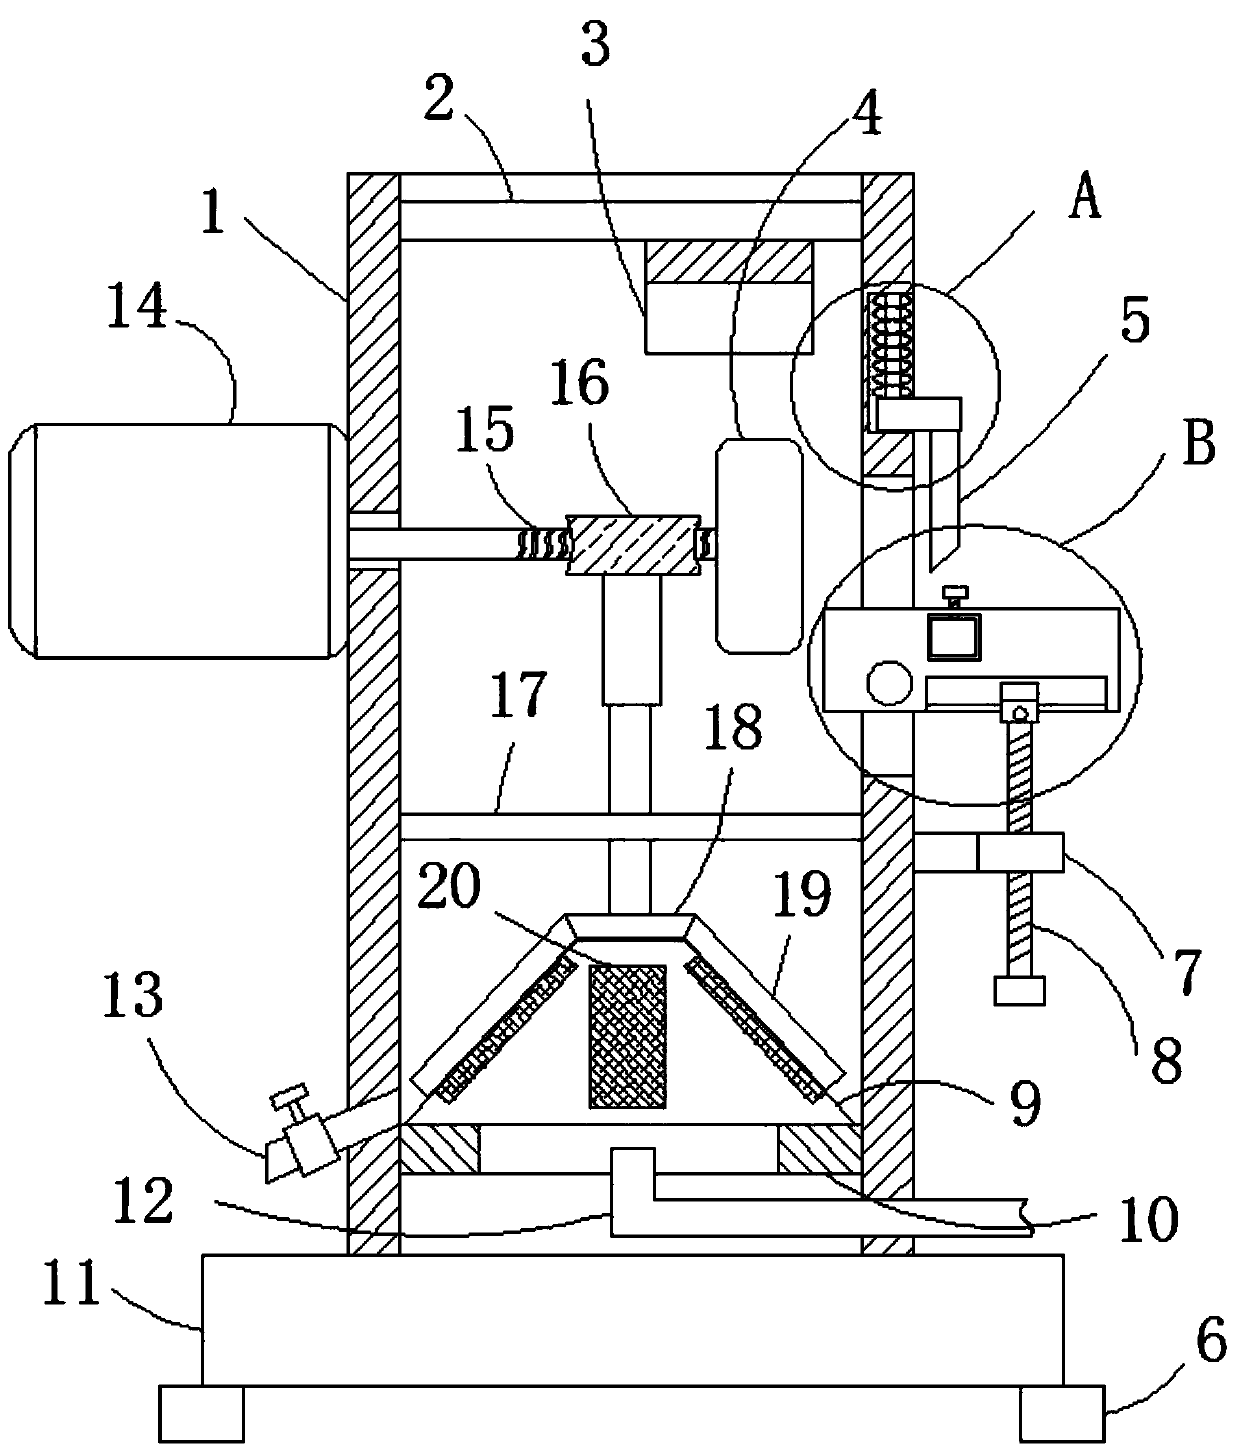 Polishing device for processing electrically operated tricycle